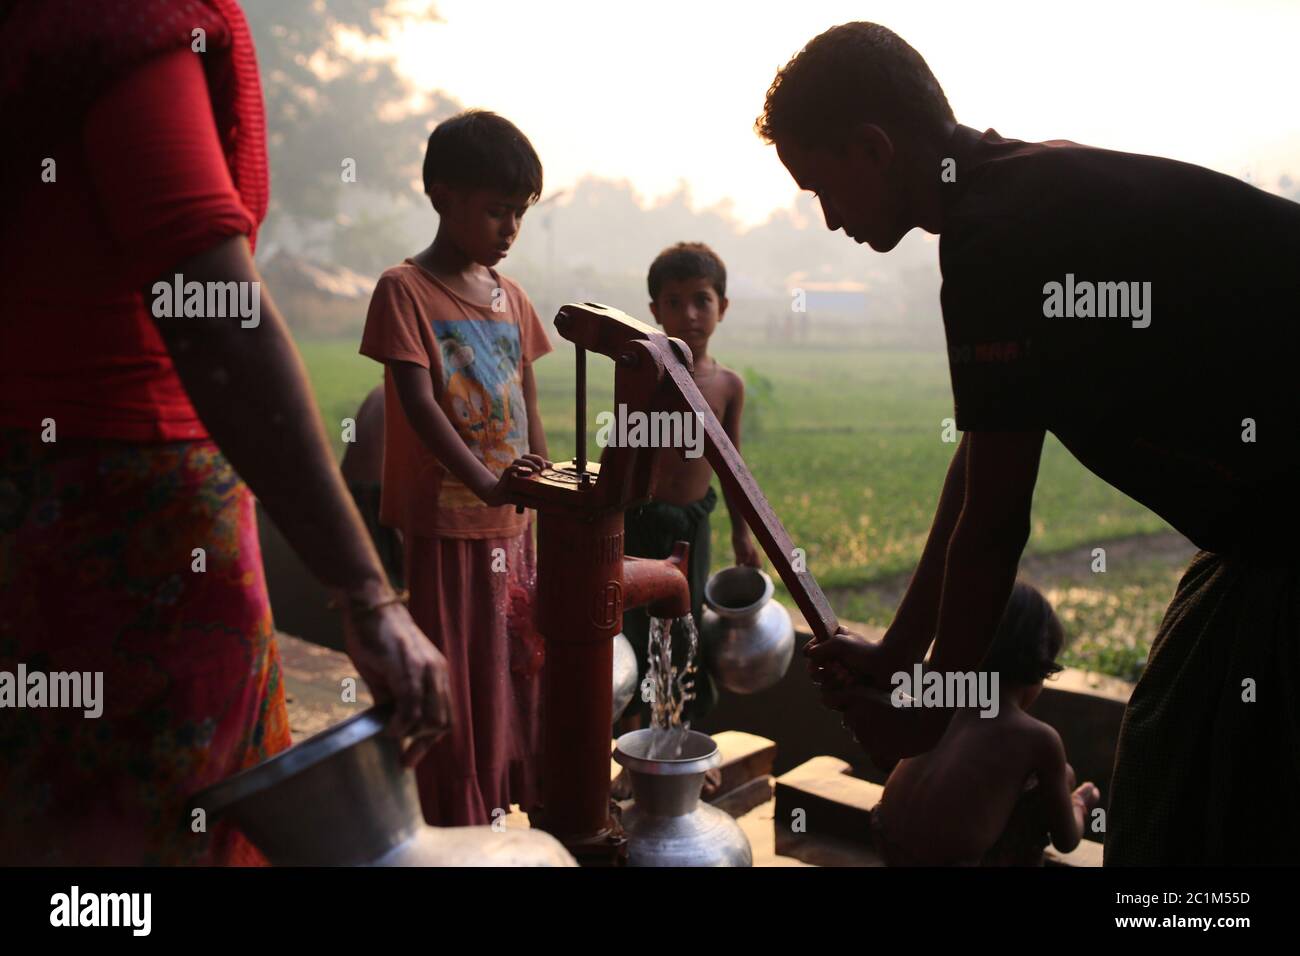 Rohingya people gather to collect drinkable water at Kutupalong refugee camp, Bangladesh, Tuesday, Oct. 03, 2017. Stock Photo